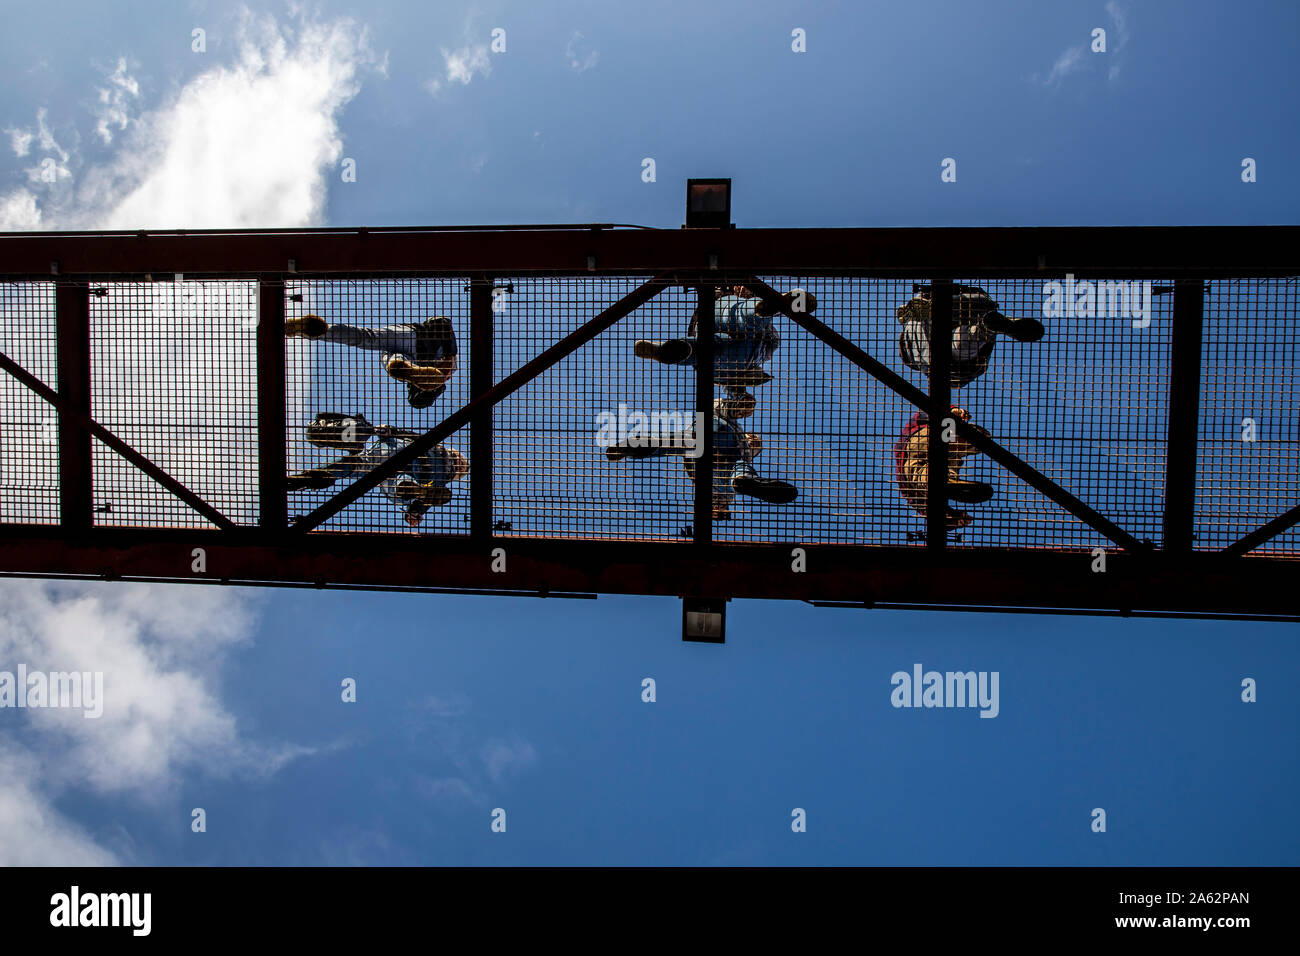 Lattice catwalk, walking at a height of 15 meters a catwalk, made of lattice, seen from below, viewing platform Stock - Alamy